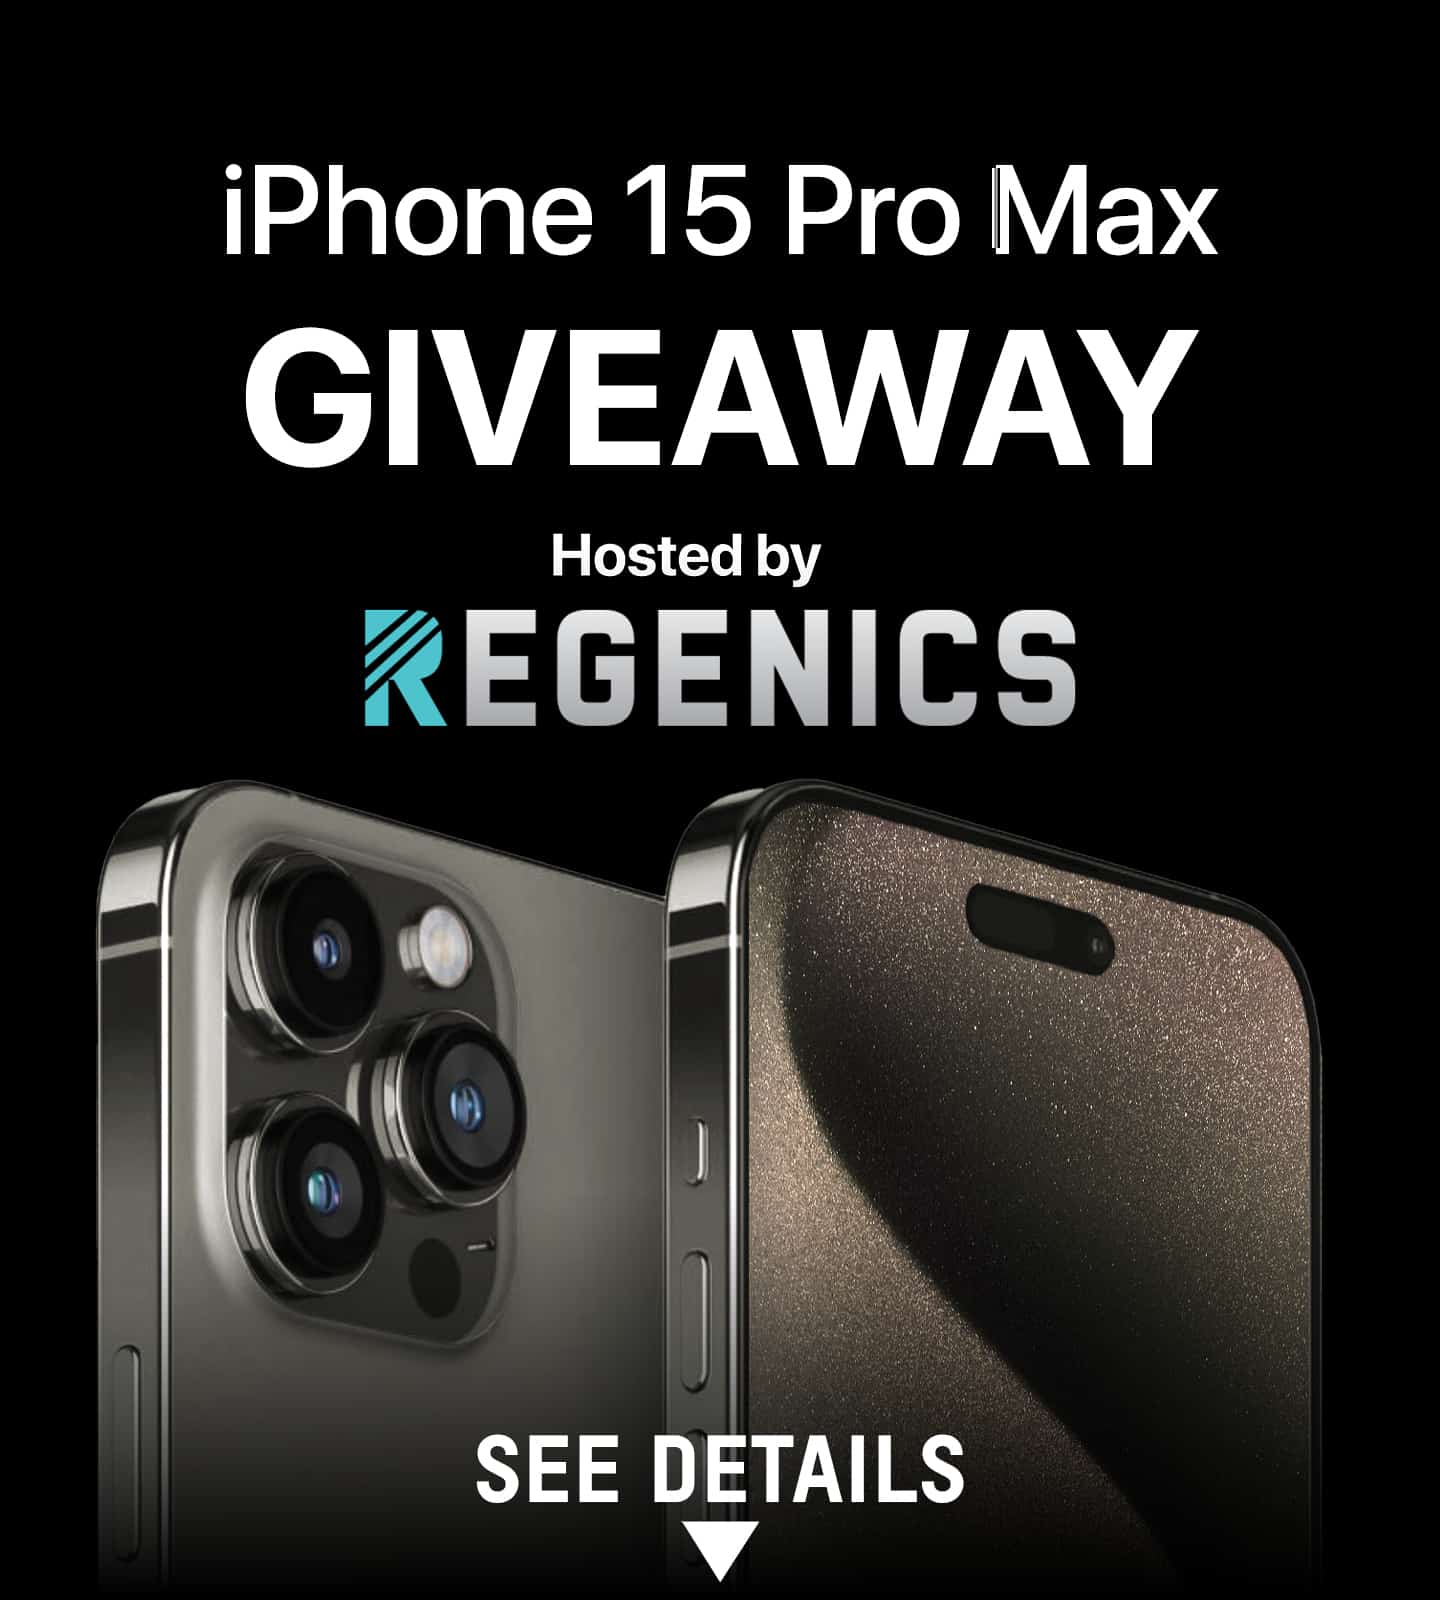 Enter for a chance to win the highly anticipated Iphone 15 Pro Max in our exclusive giveaway.